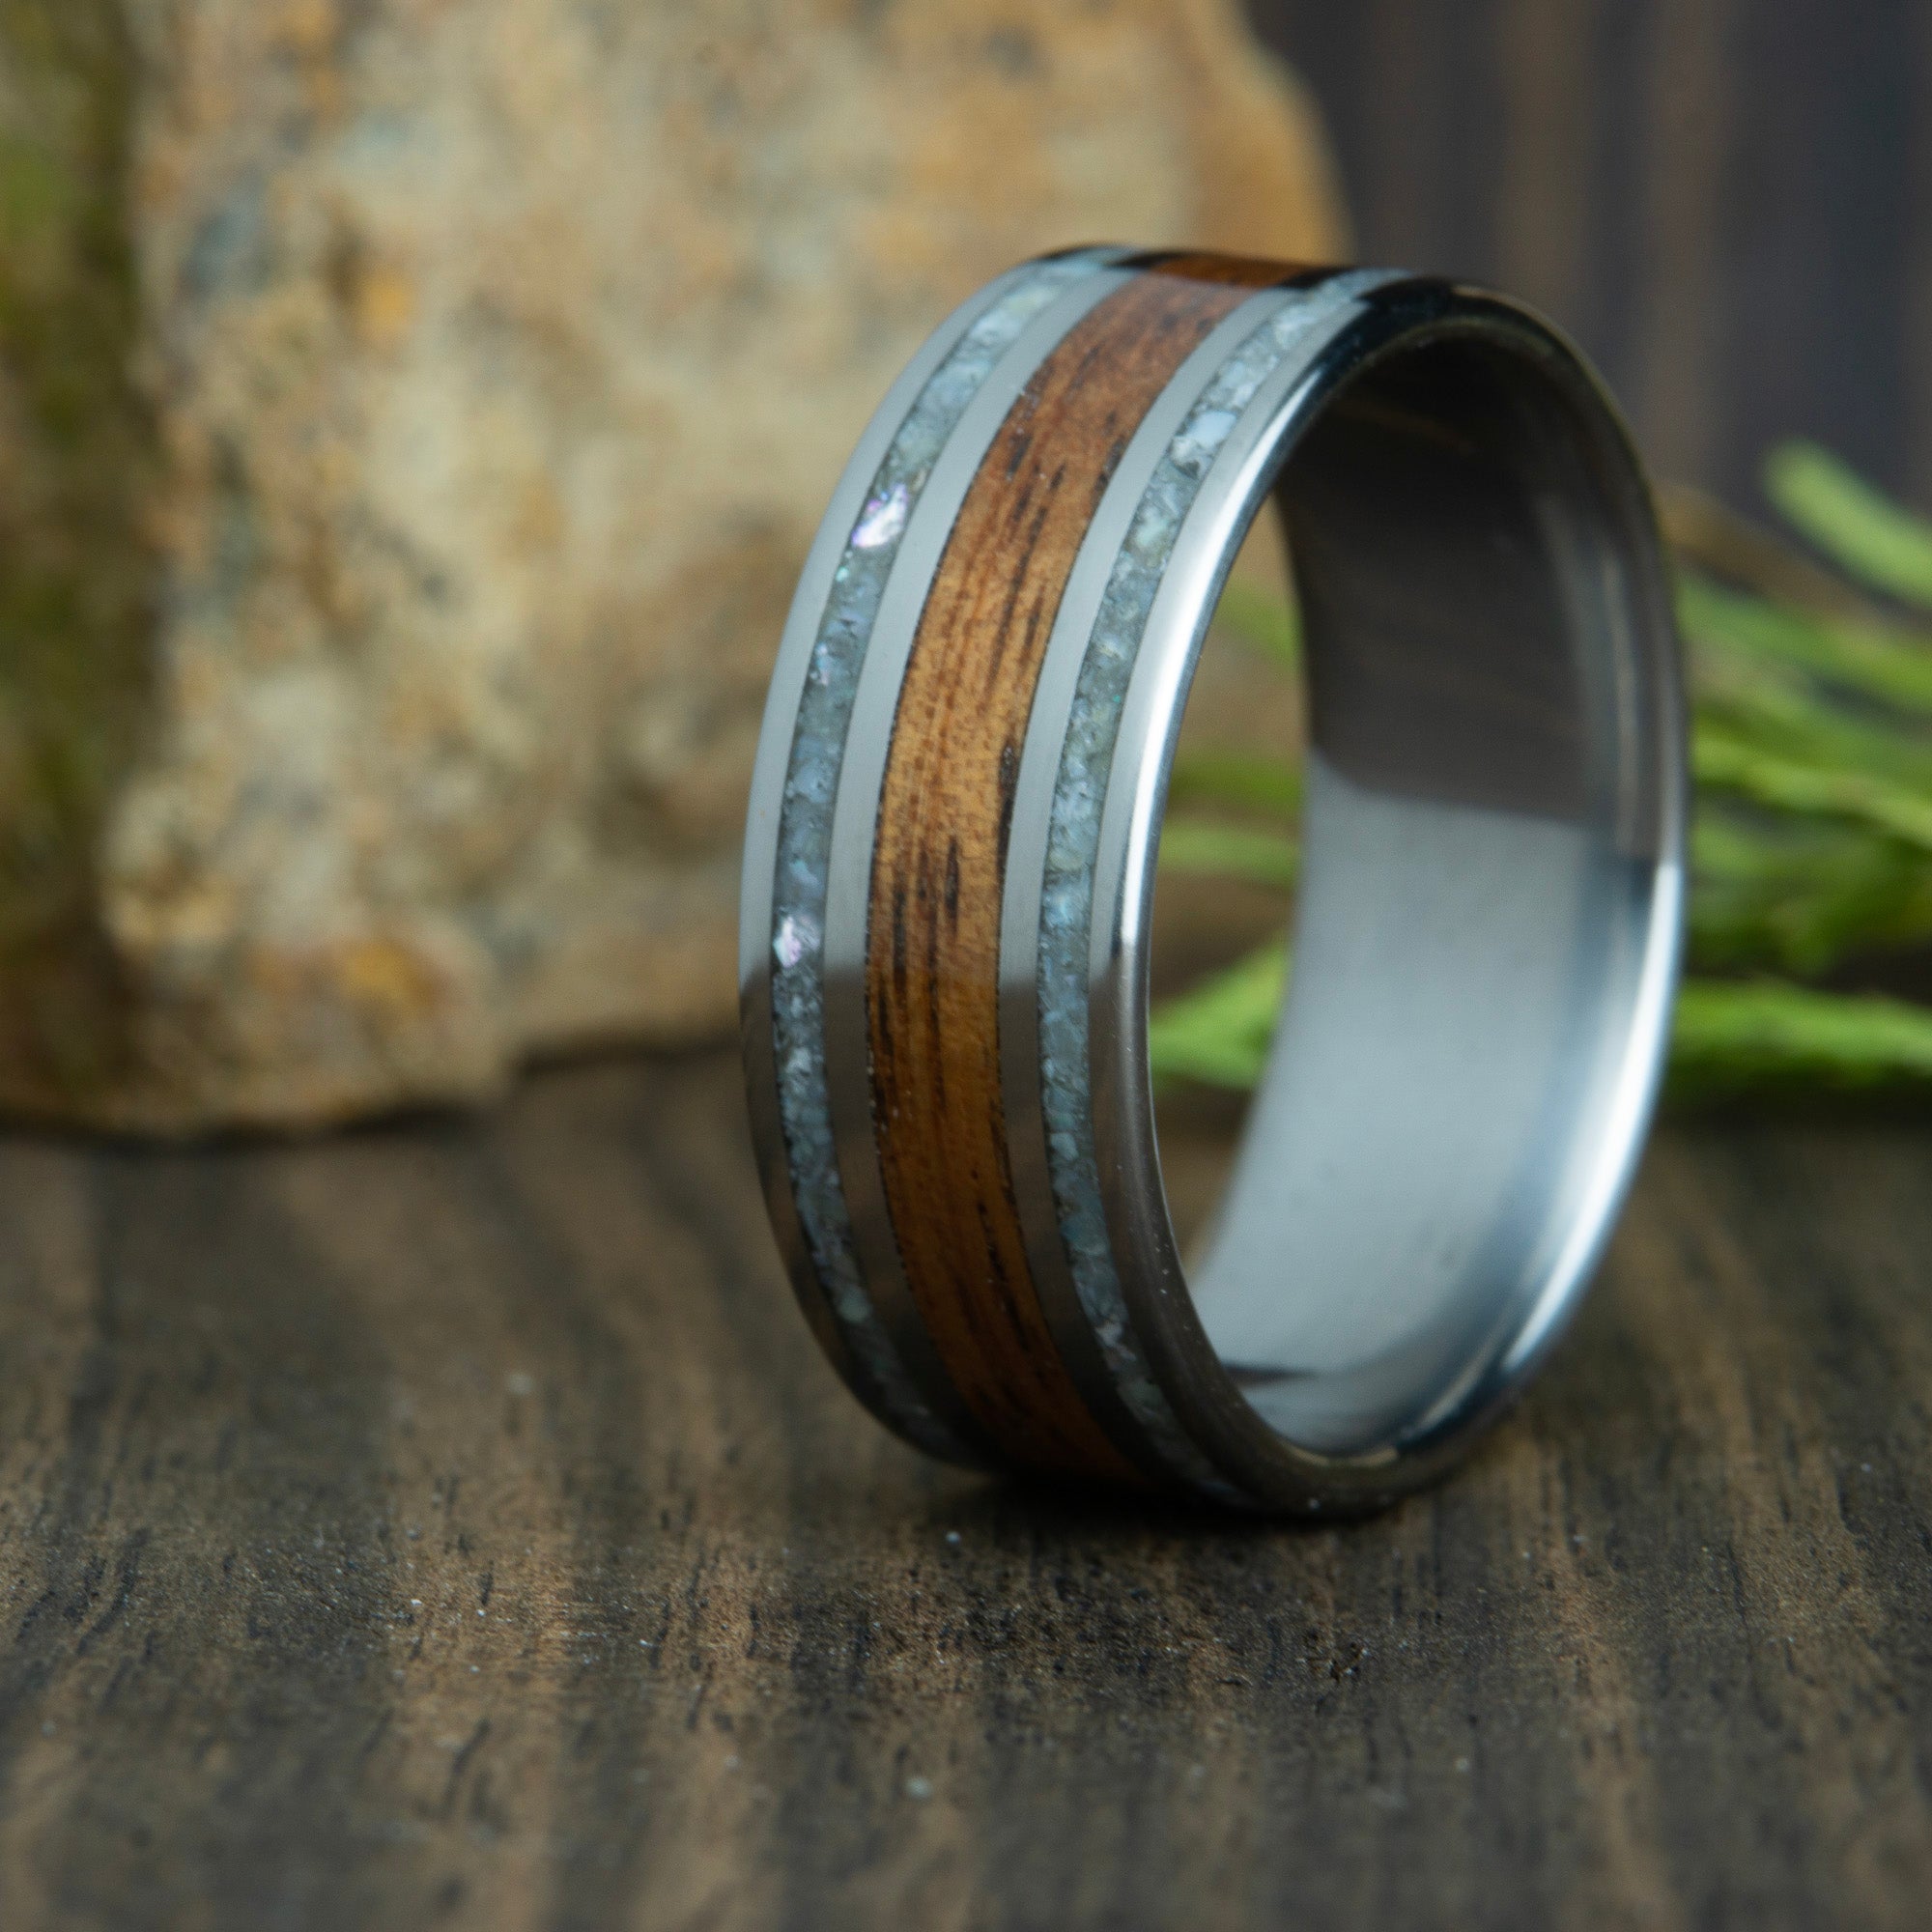 Koa wood ring with mother of pearl inlay